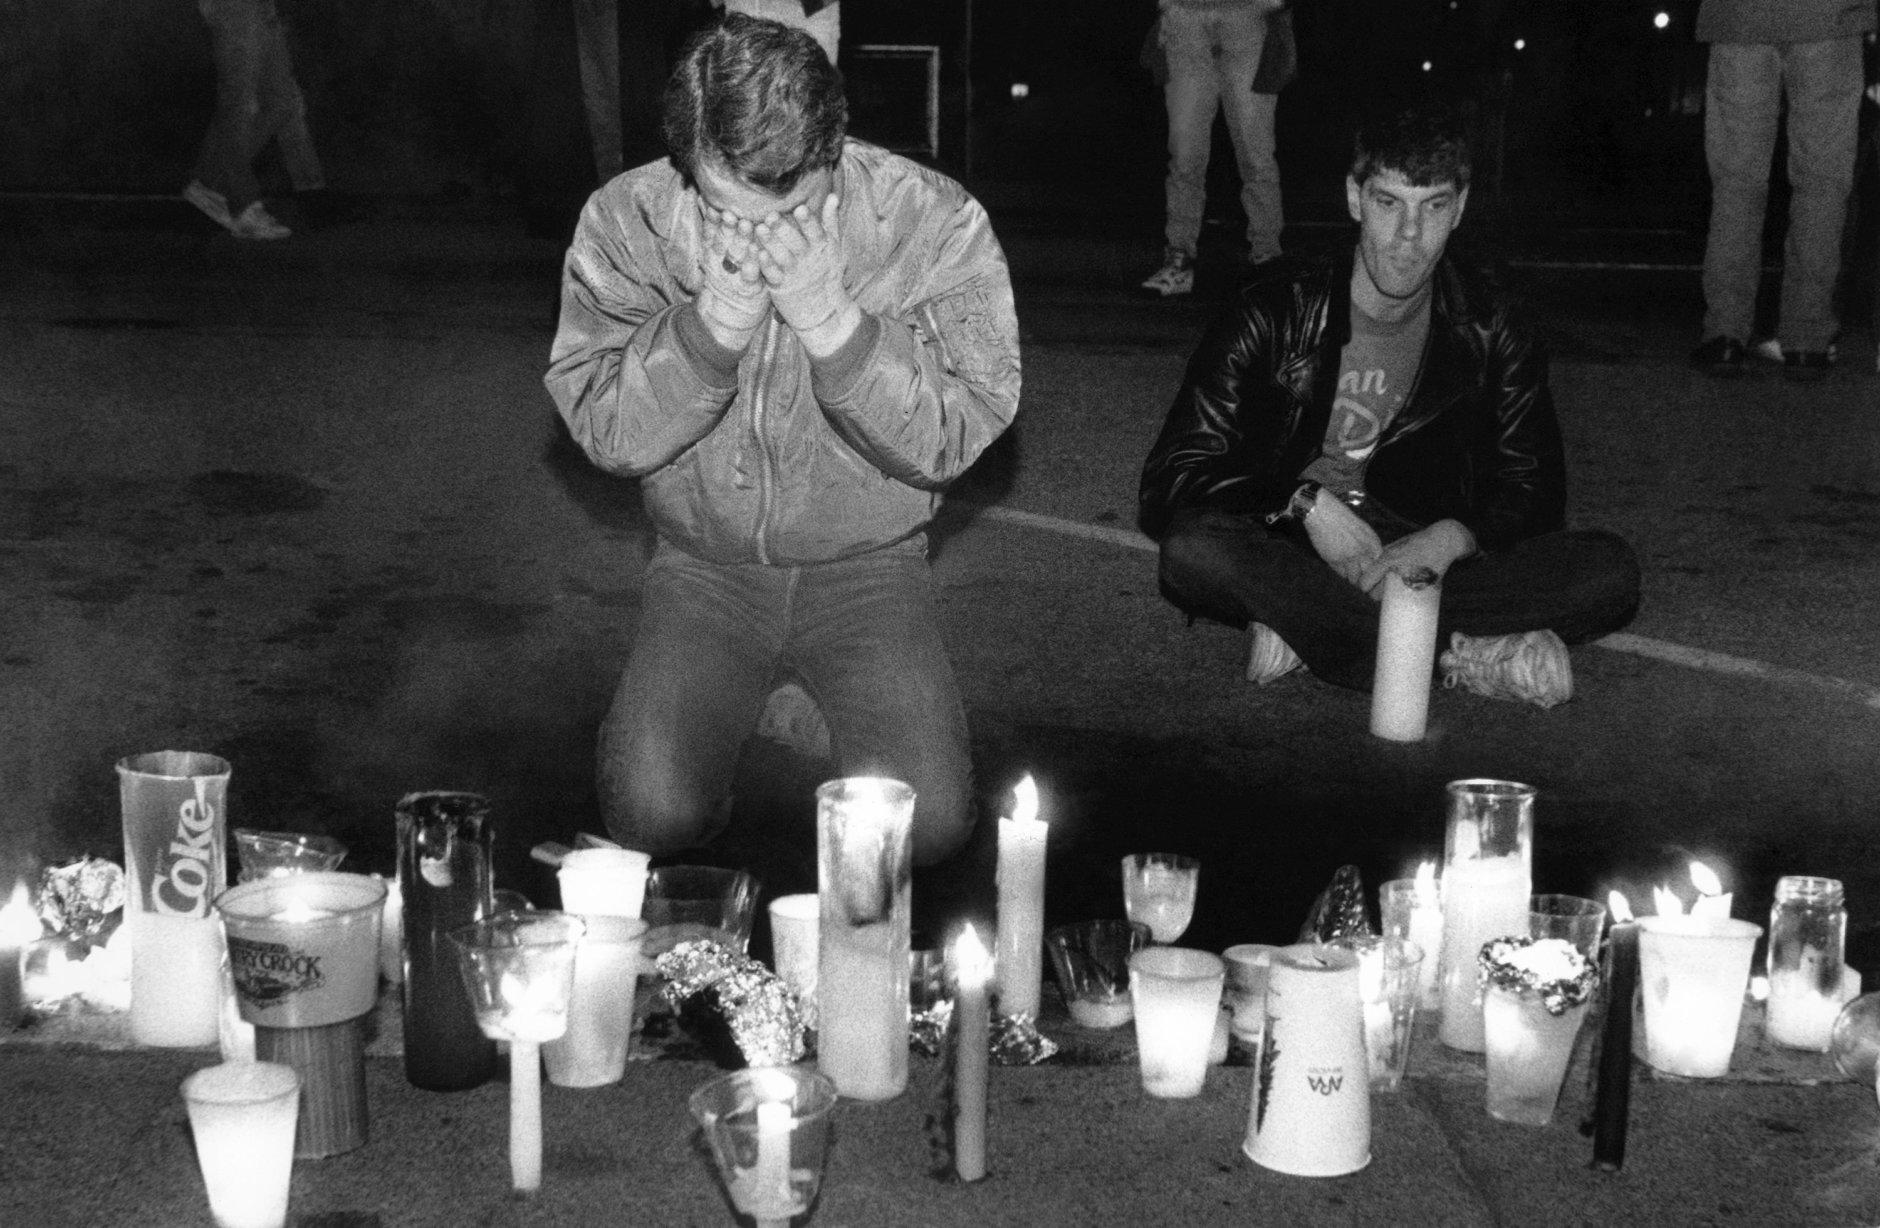 FILE - In this May 21, 1990 file picture, Scotty McQuown of San Francisco, left, weeps in front of a makeshift memorial to AIDS victims during the seventh annual International AIDS Candlelight Memorial in San Francisco. Up to 20,000 people gathered in front of San Francisco's City Halll to remember those lost to the disease and those still fighting it. Sunday, June 5, 2011 marks 30 years since the first AIDS cases were reported in the United States. Nearly 30 million people have died of AIDS since the first five cases were recognized in Los Angeles in 1981. About 34 million people have HIV now, including more than 1 million in the United States. (AP Photo/Bill Beattie)